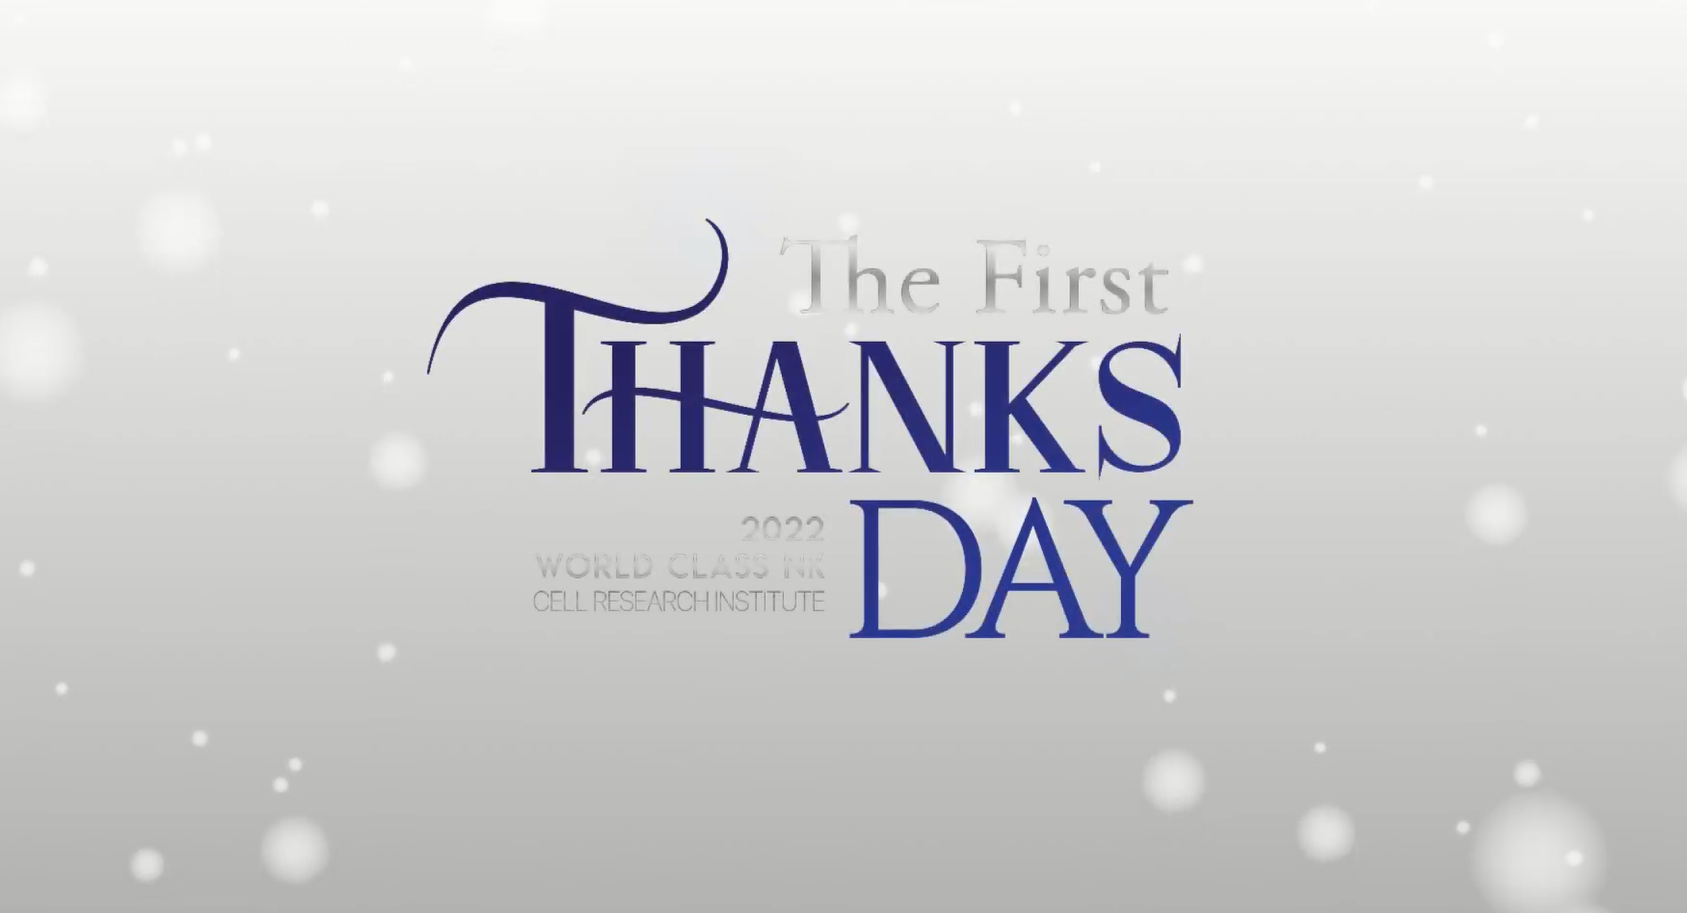 The First Thanksday 행사 스케치 영상, NKC..